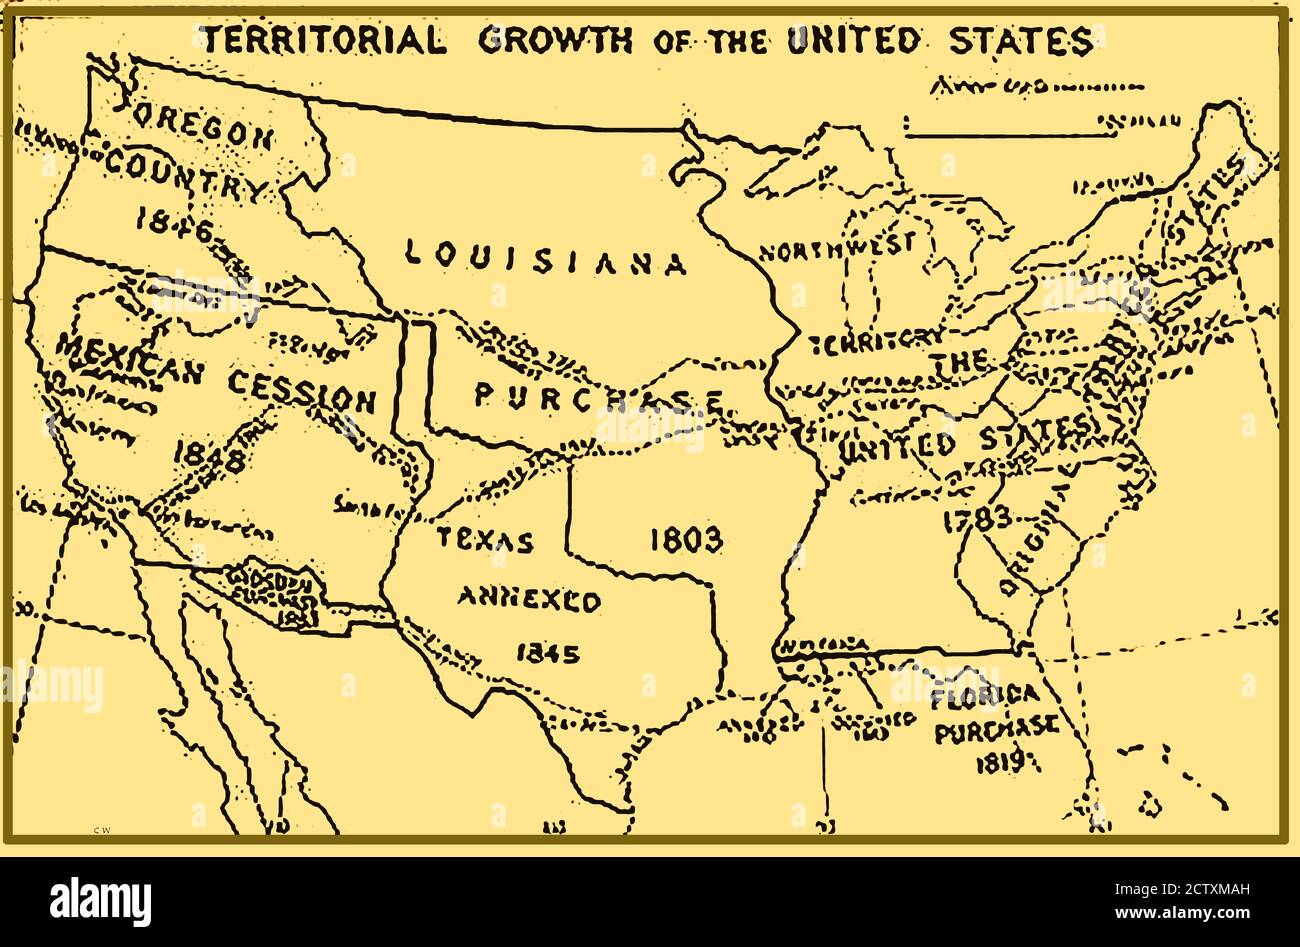 1933 map of the usa showing territorial growth. Stock Photo